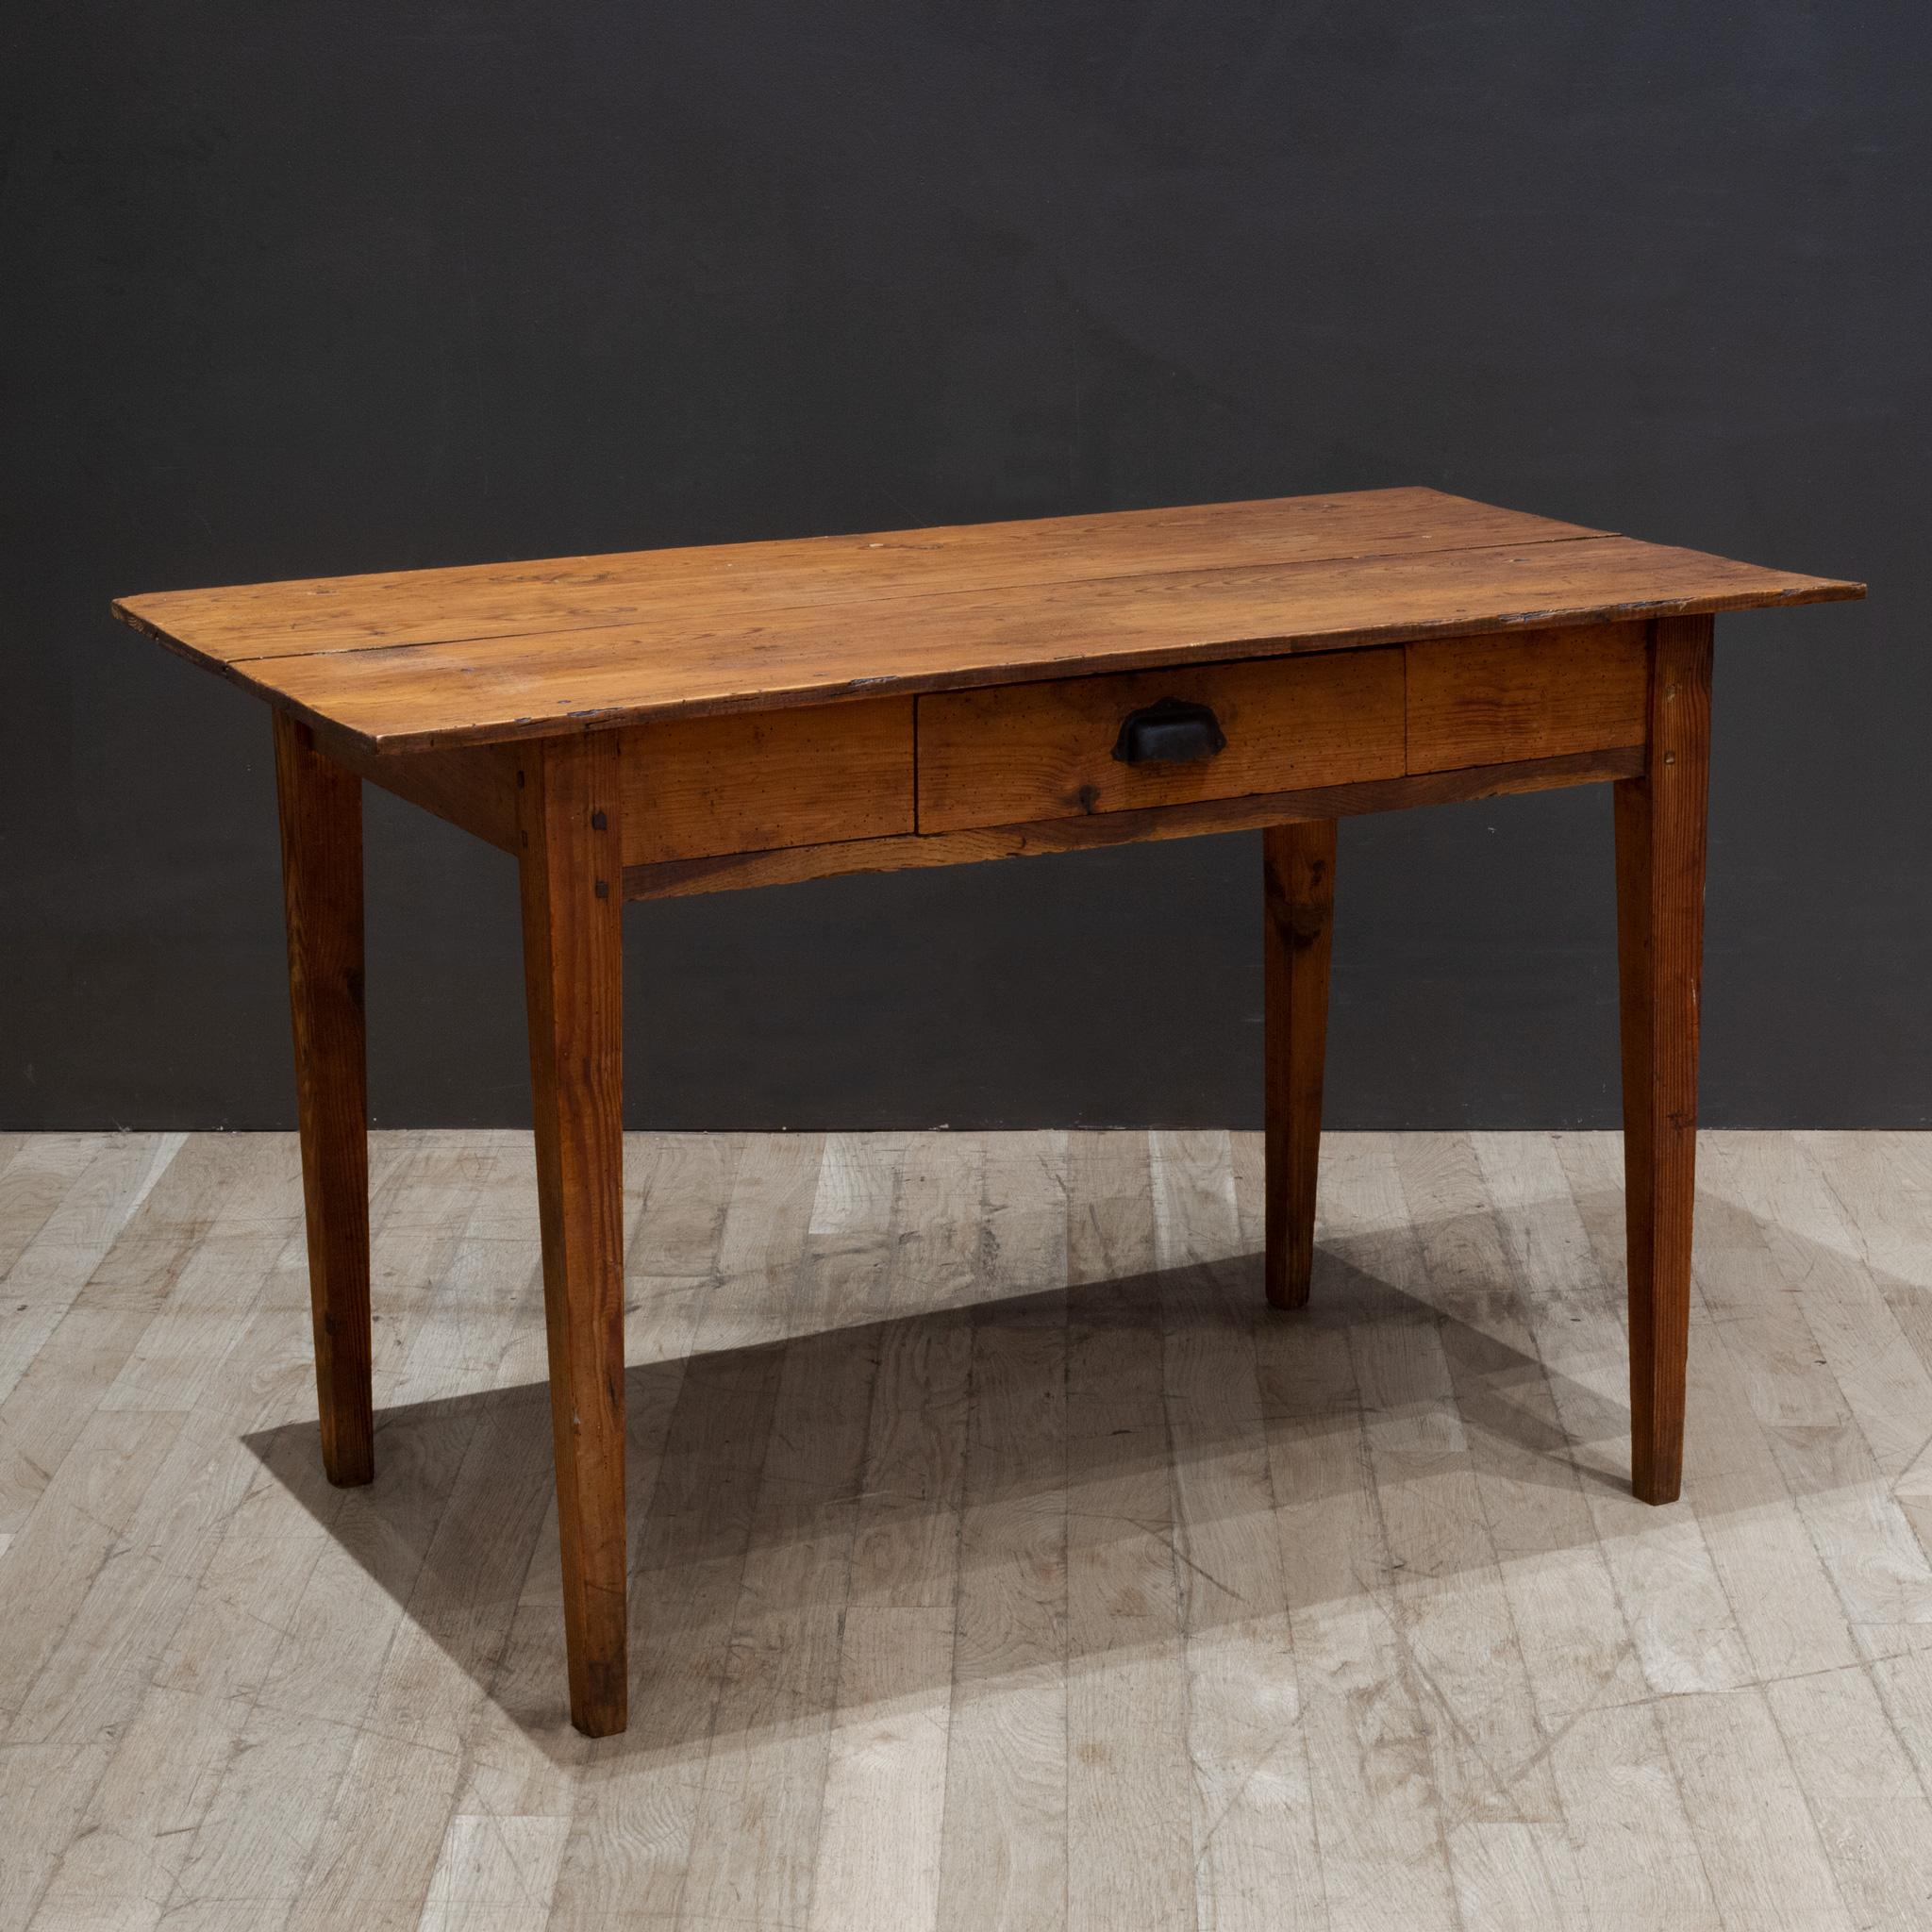 19th c. Rustic French Farmhouse Table c.1850-1900 In Good Condition For Sale In San Francisco, CA